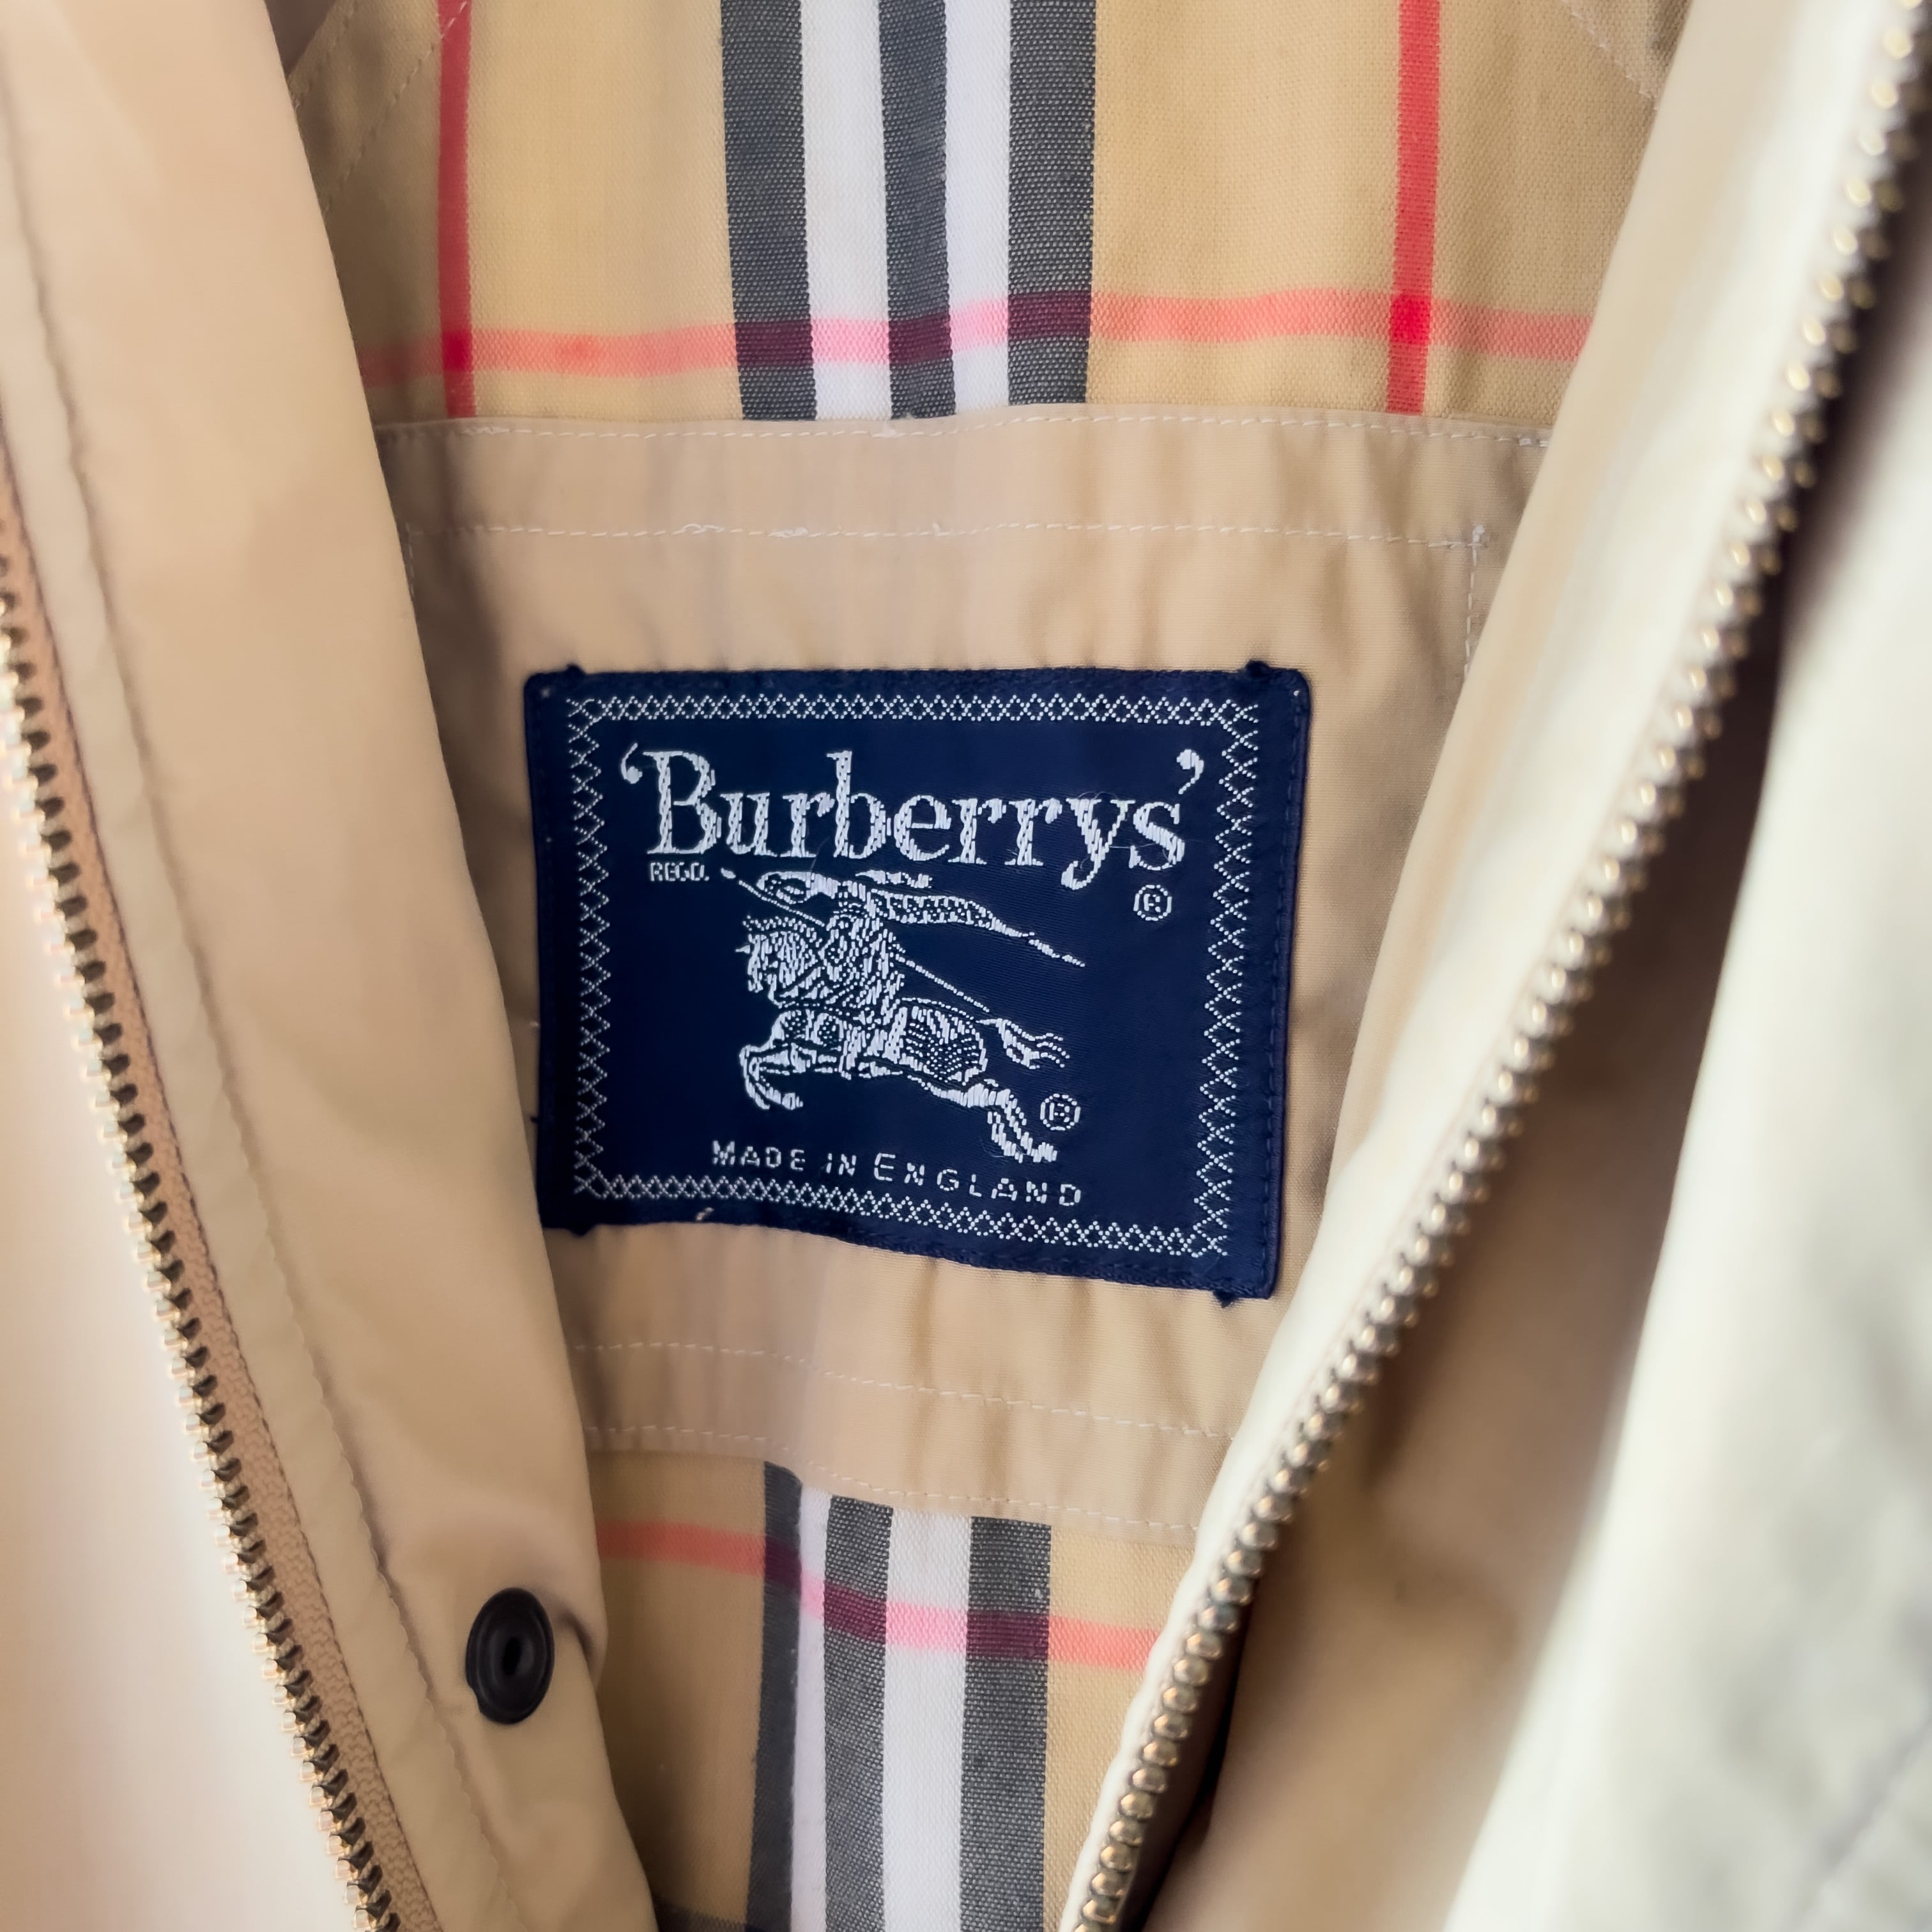 s “burberrys” made in England fooded field coat バーバリー 英国